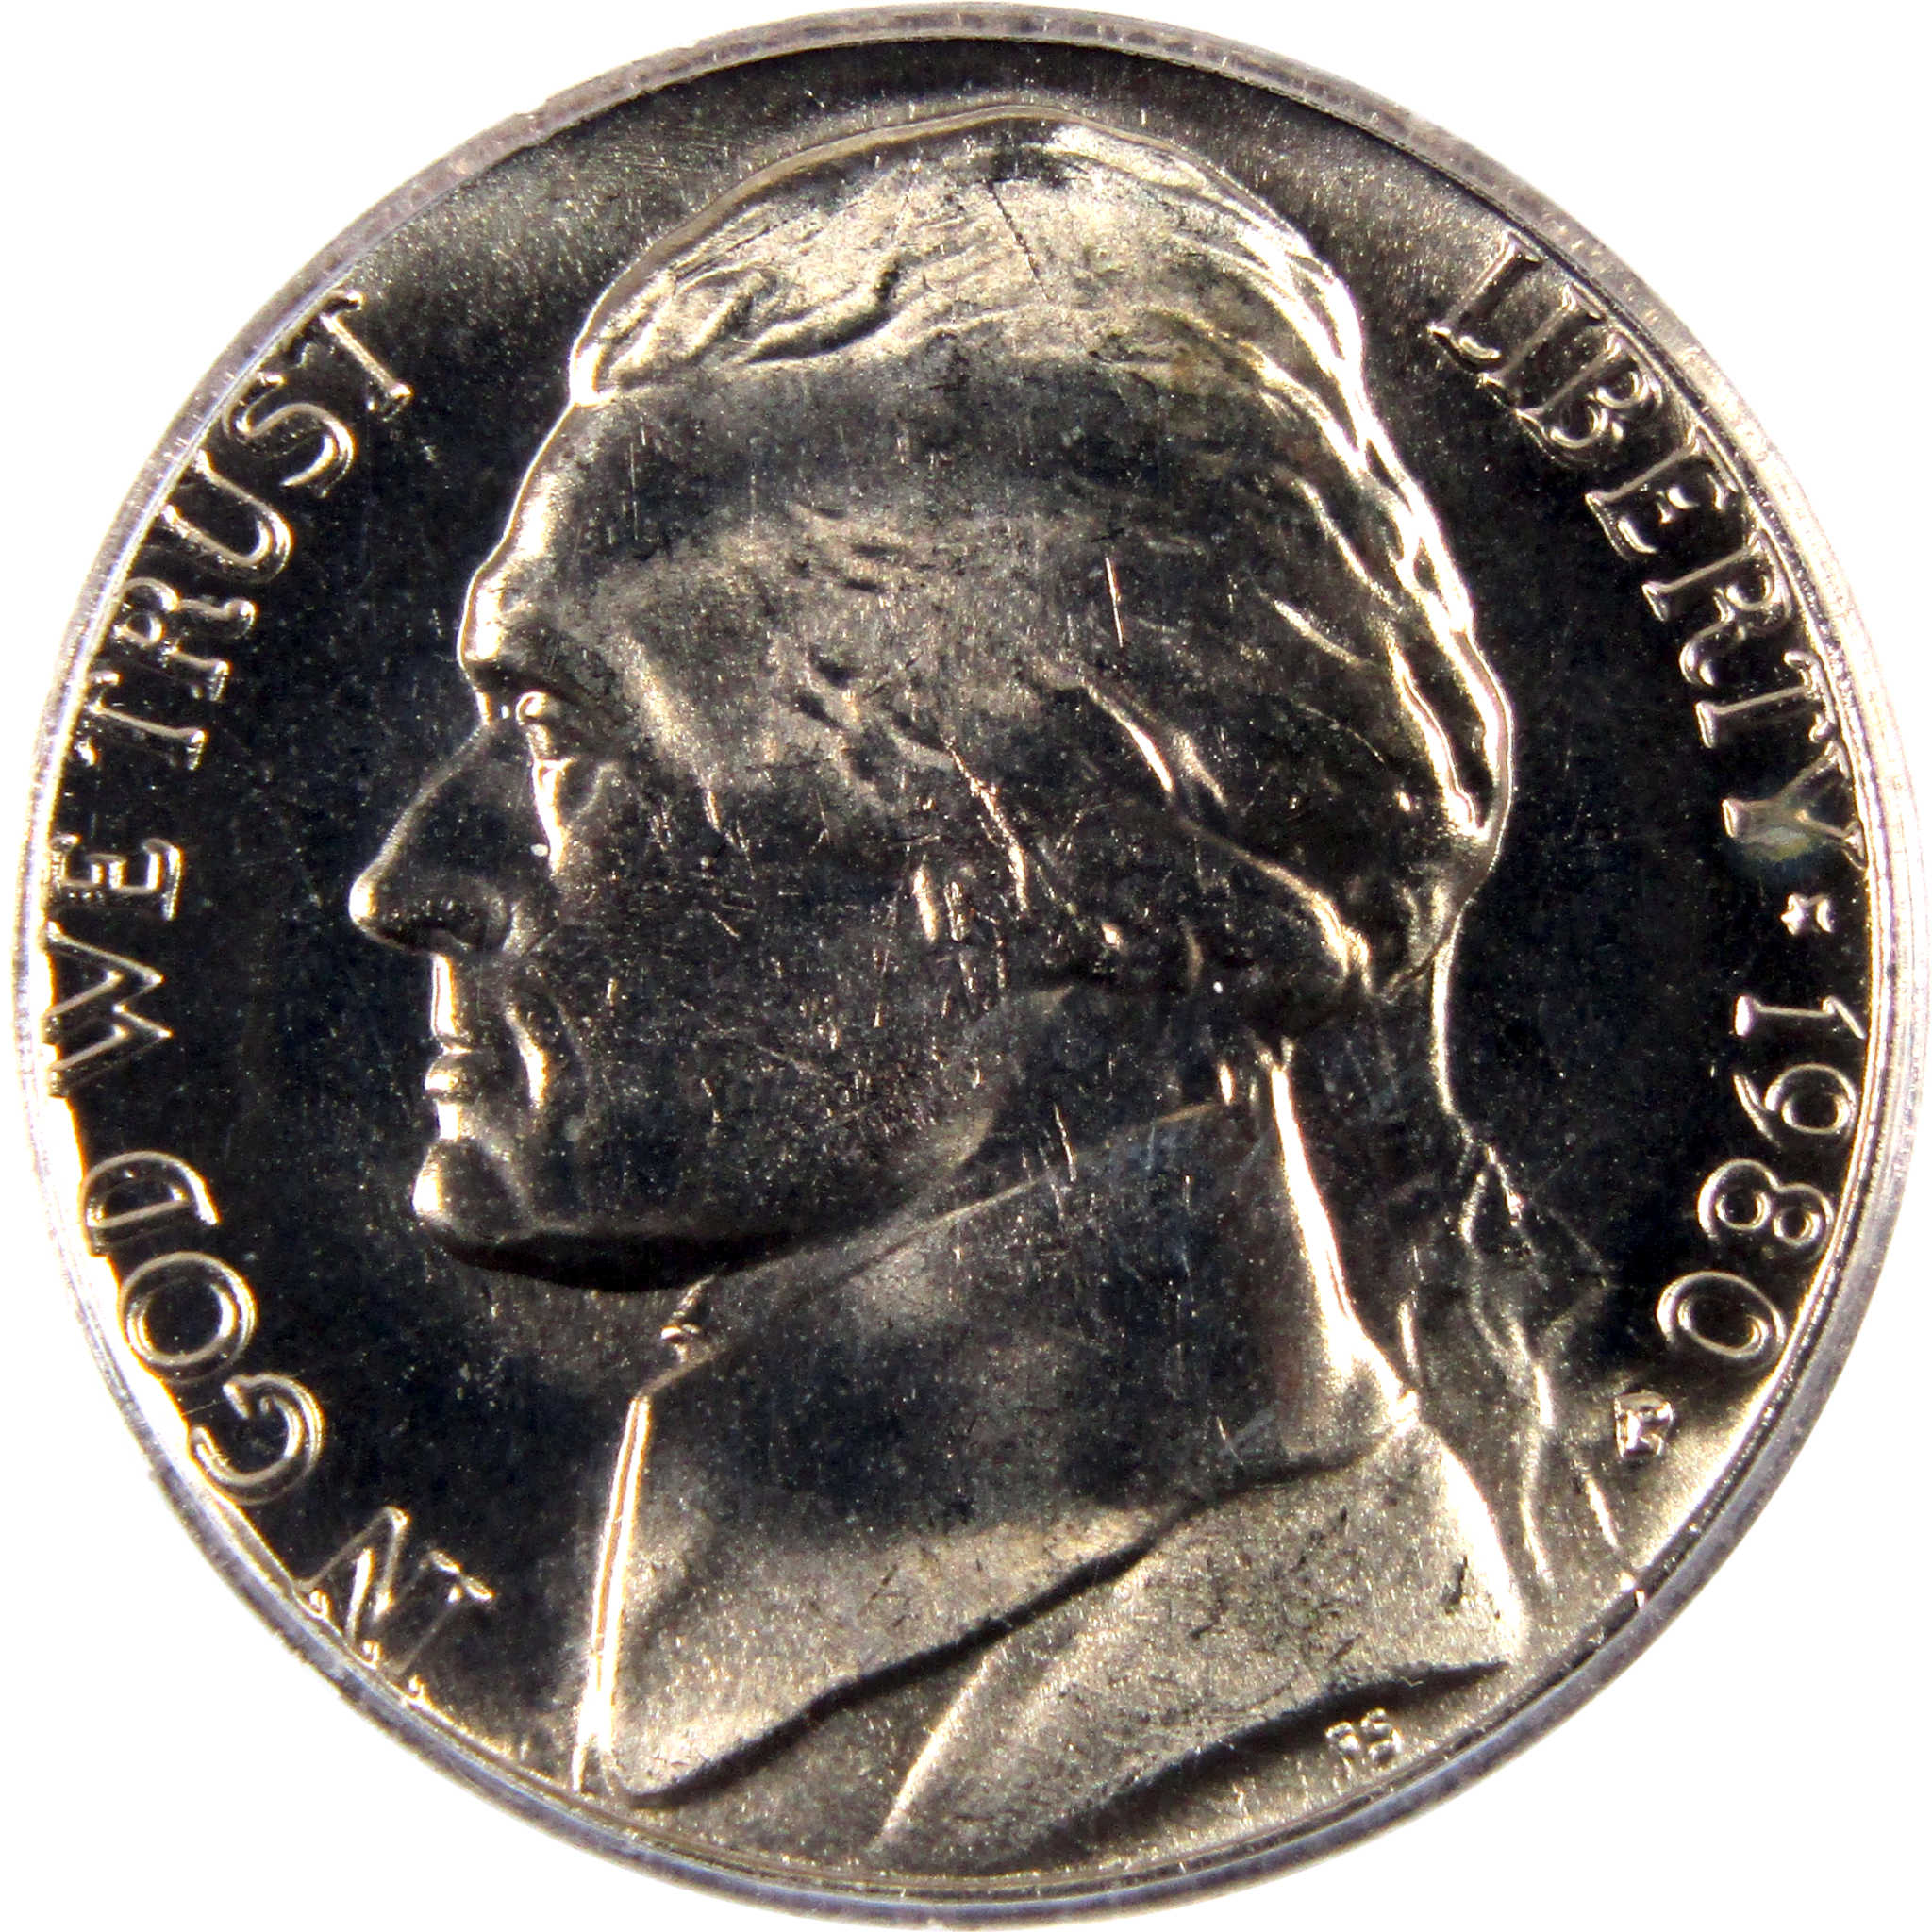 1980 P Jefferson Nickel MS 66 PCGS 5c Uncirculated Coin SKU:CPC4246